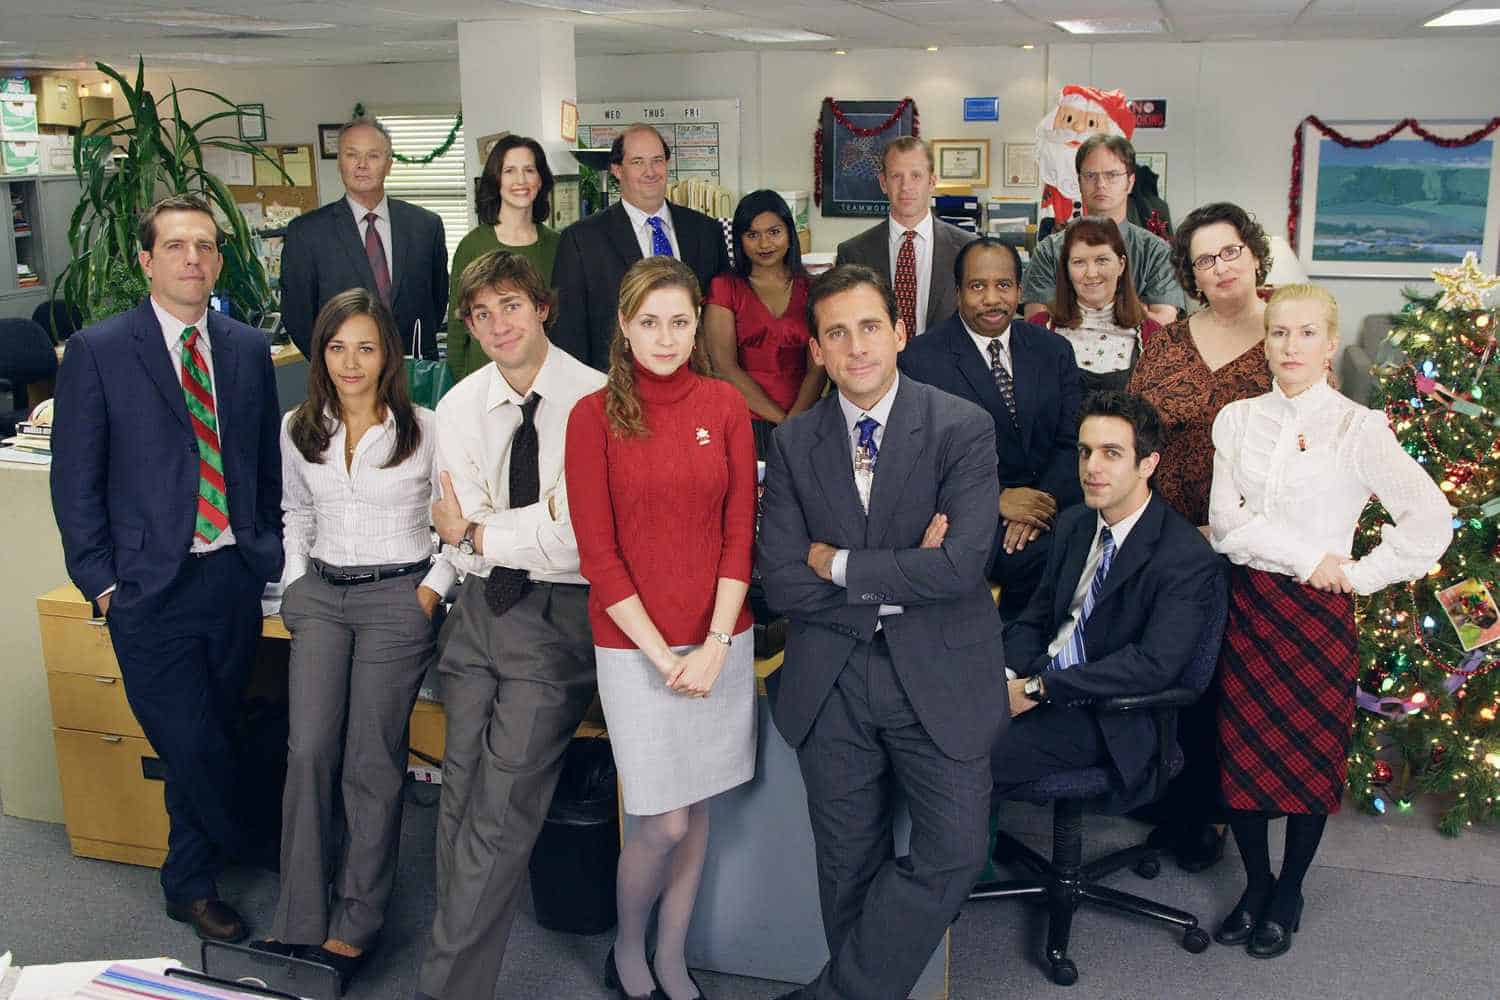 Cast of the show, The Office